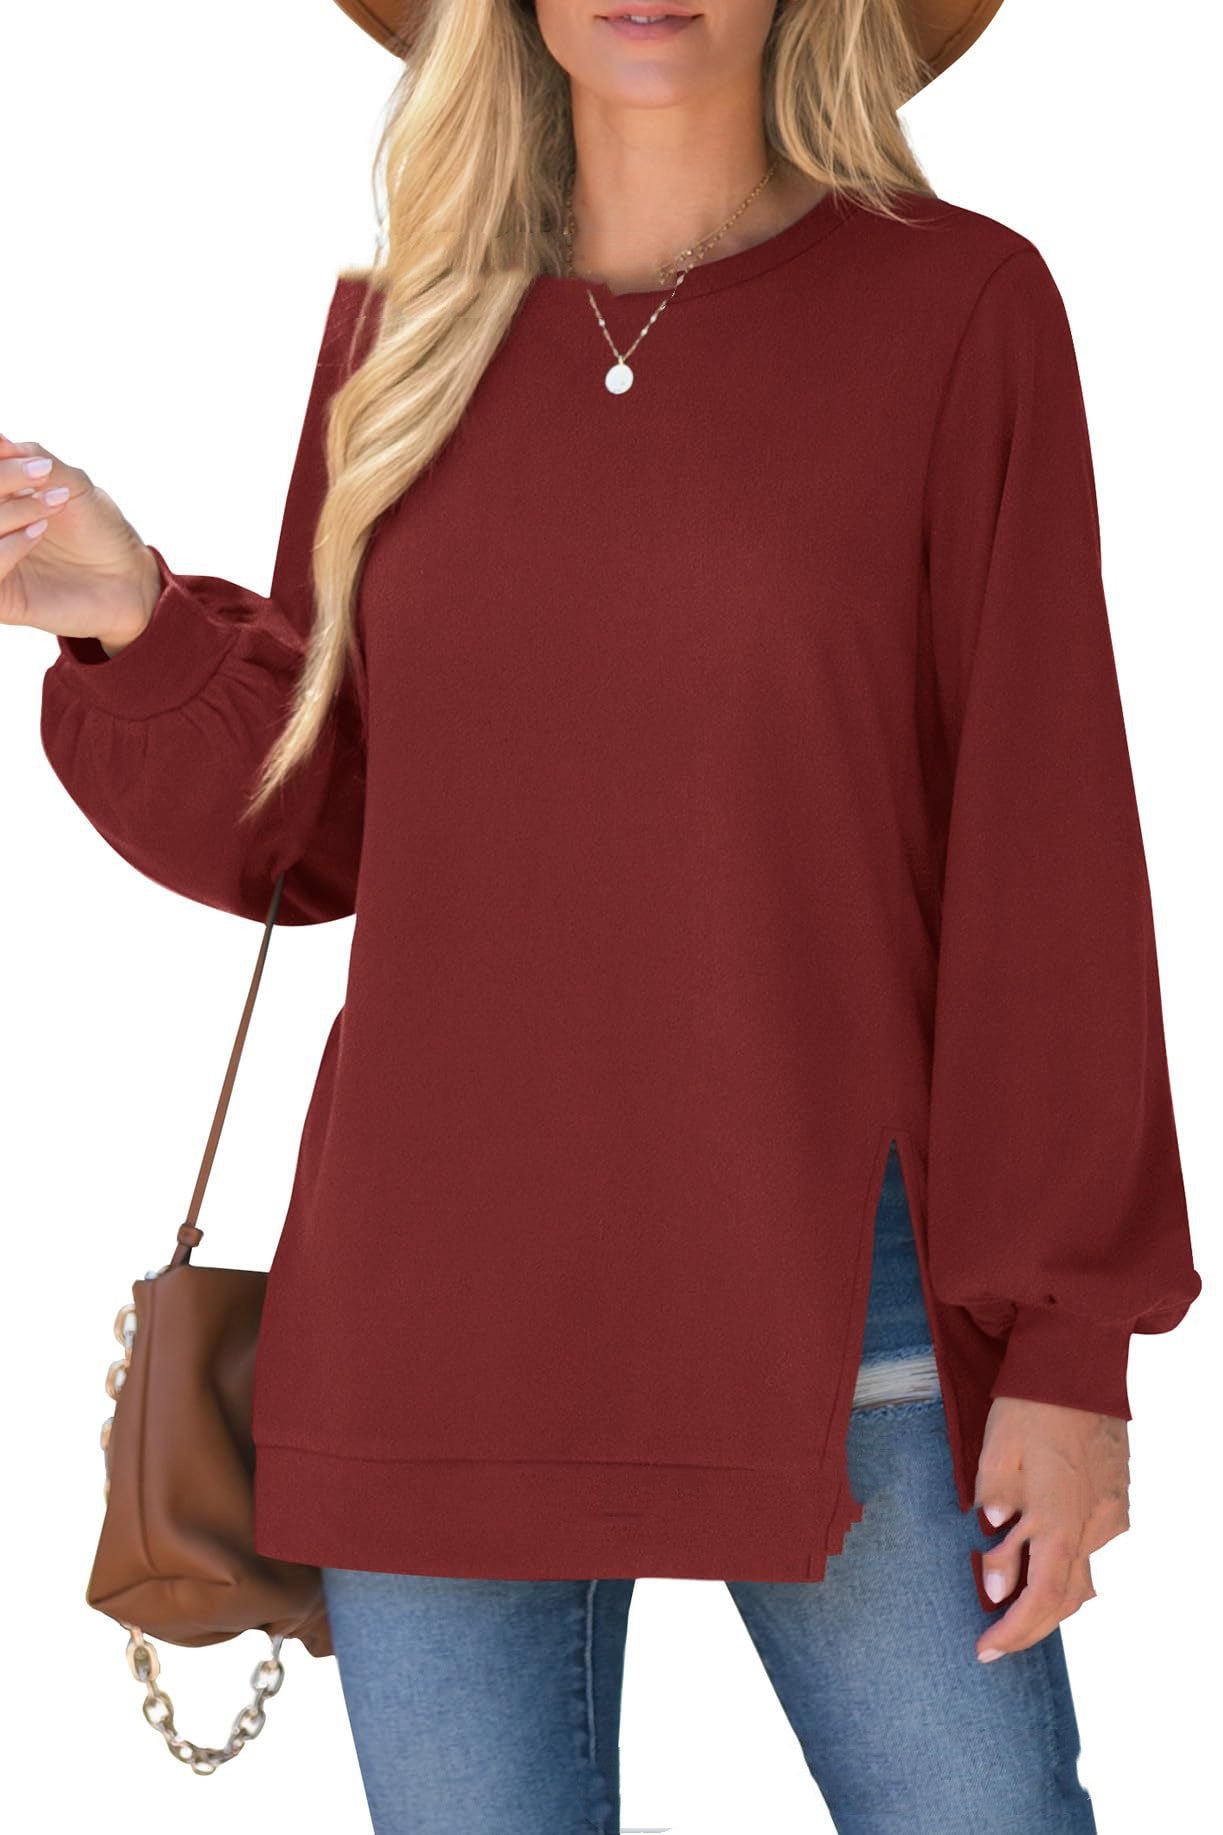 Women's sweater with side slit